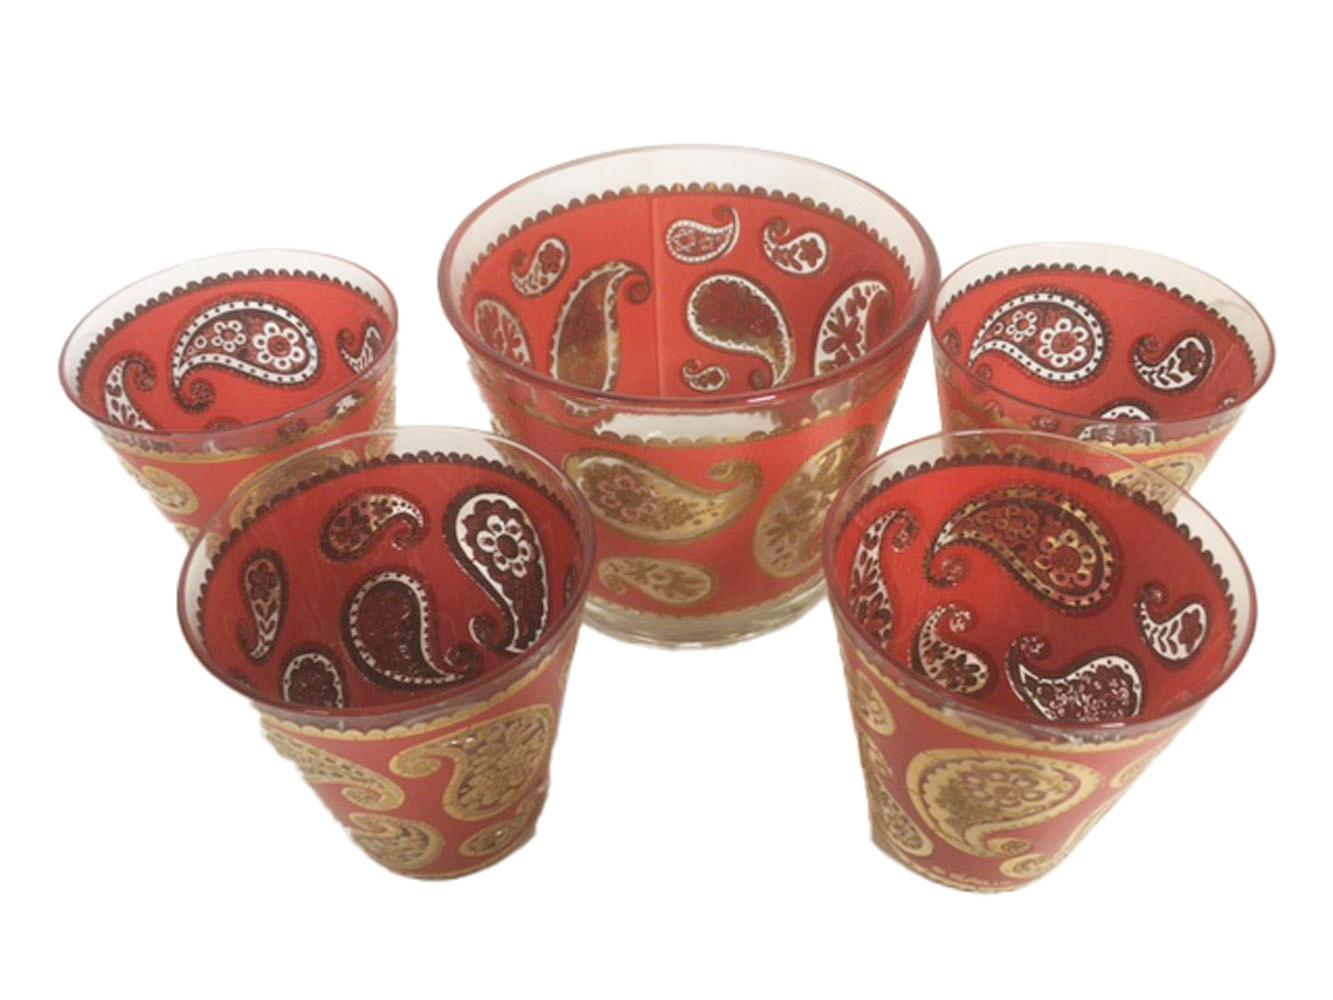 Vintage Culver red paisley ice bowl and 4 double old fashioned glasses. Decorated with paisley elements in 22k gold on a pebbled red ground.

Measures: Ice Bowl: 5